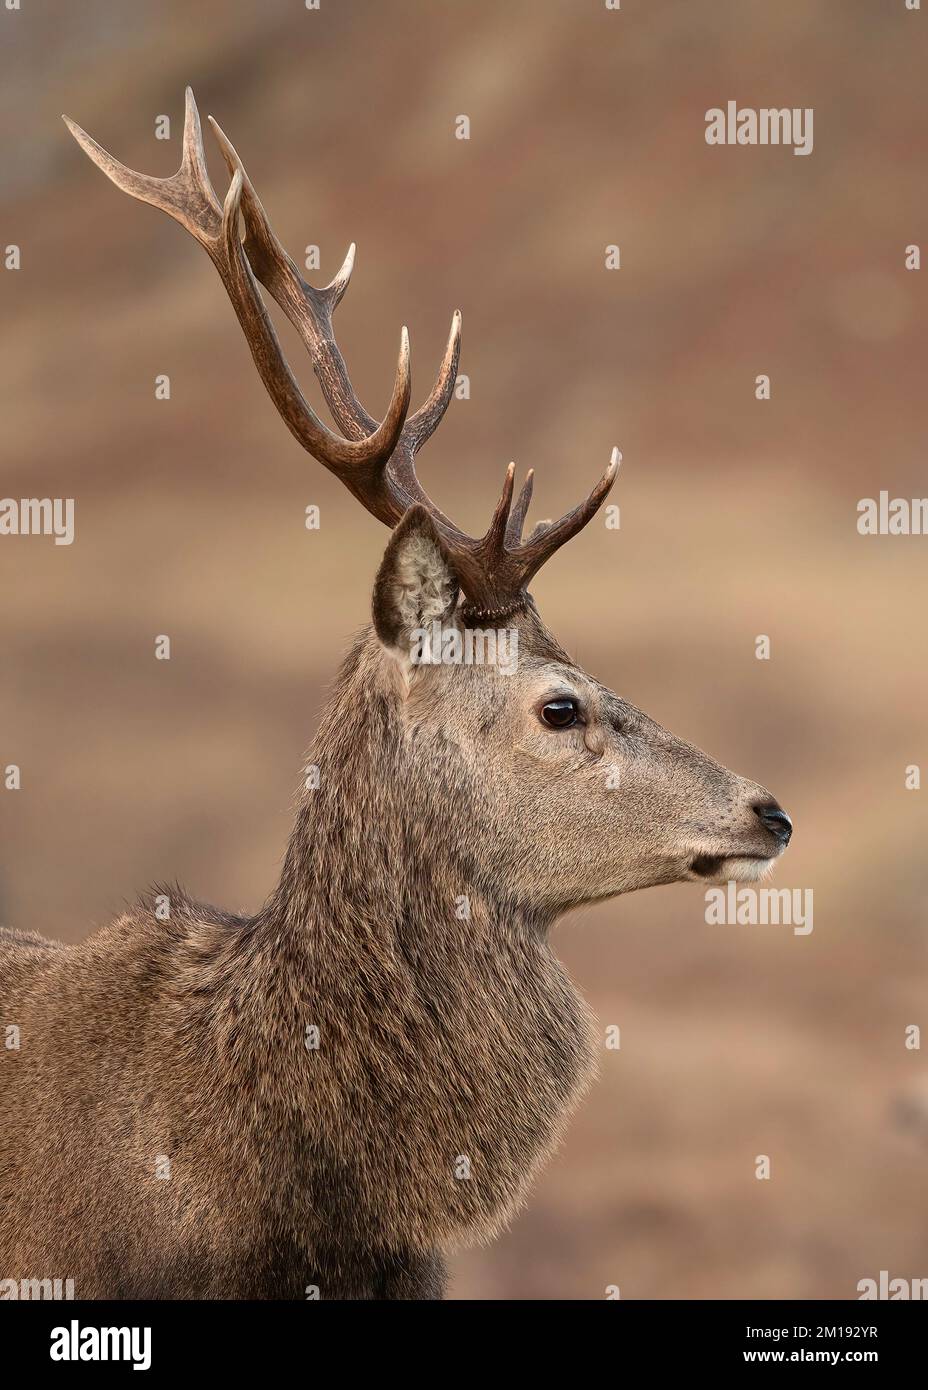 A red Stag profile image taken in Scotland in the cairngorms very sharp image Stock Photo